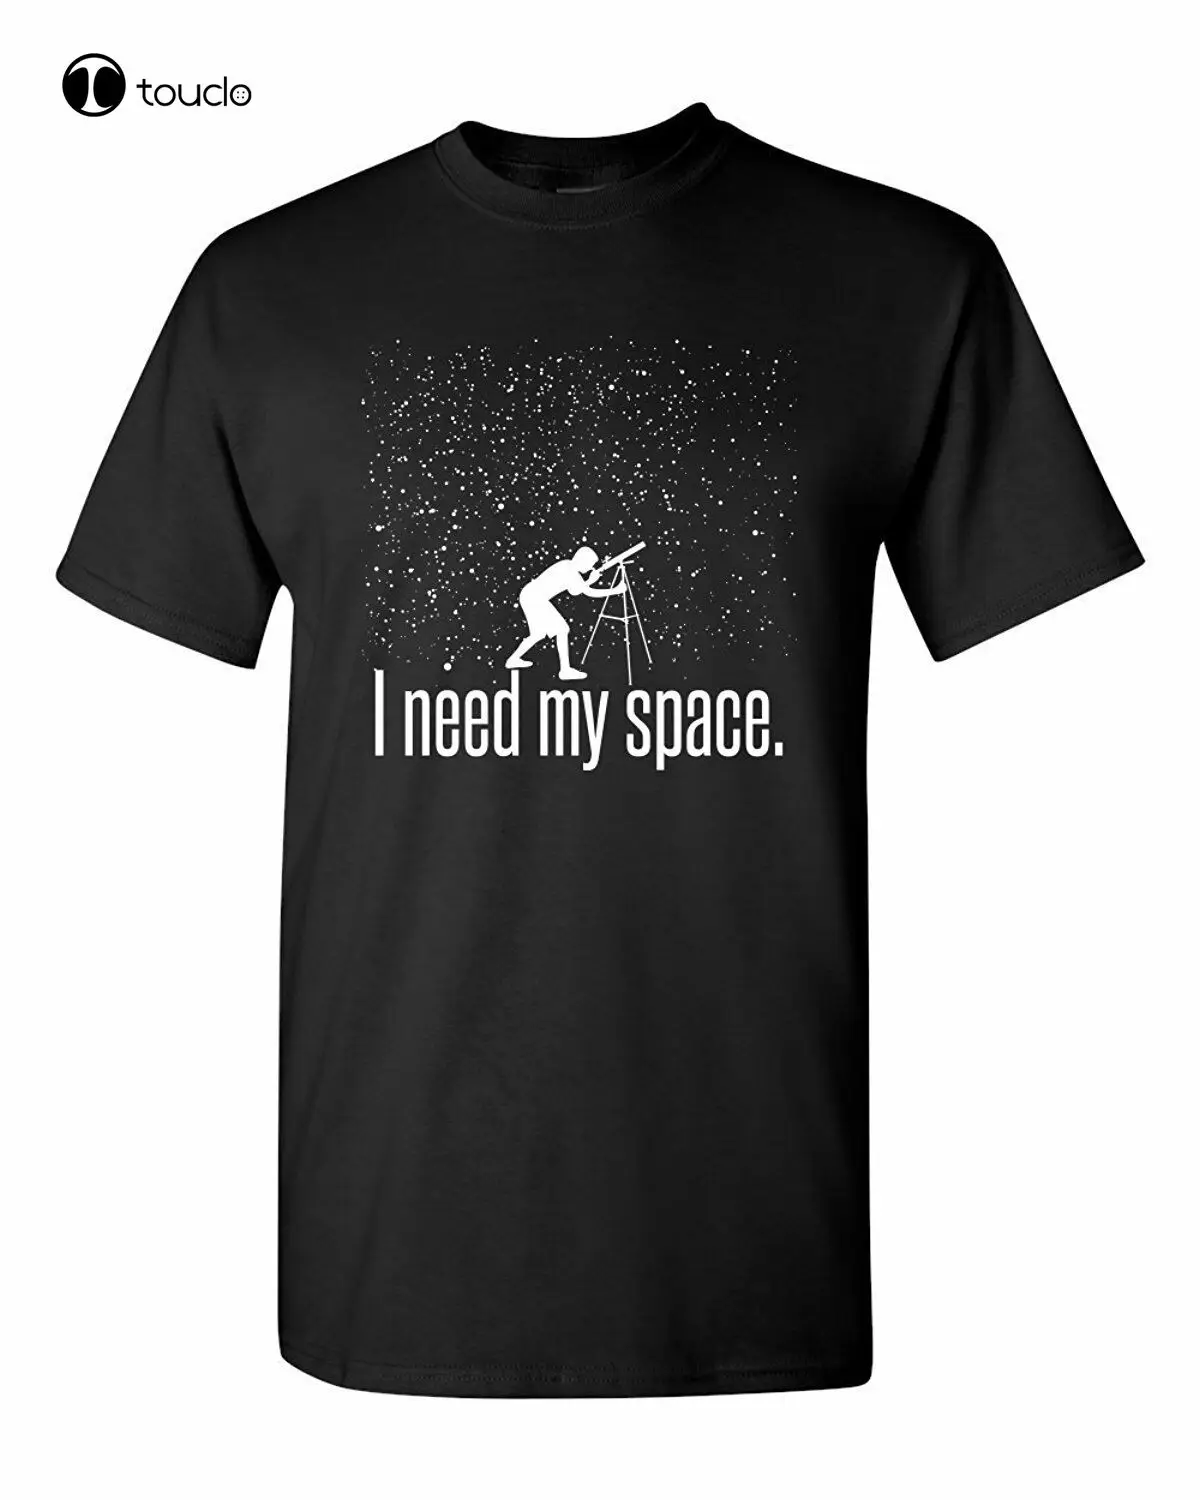 Need My Space Astronomy Telescope Funny Humor Pun  Adult Graphic T-Shirt Tee Shirt Fashion Funny New Xs-5Xl